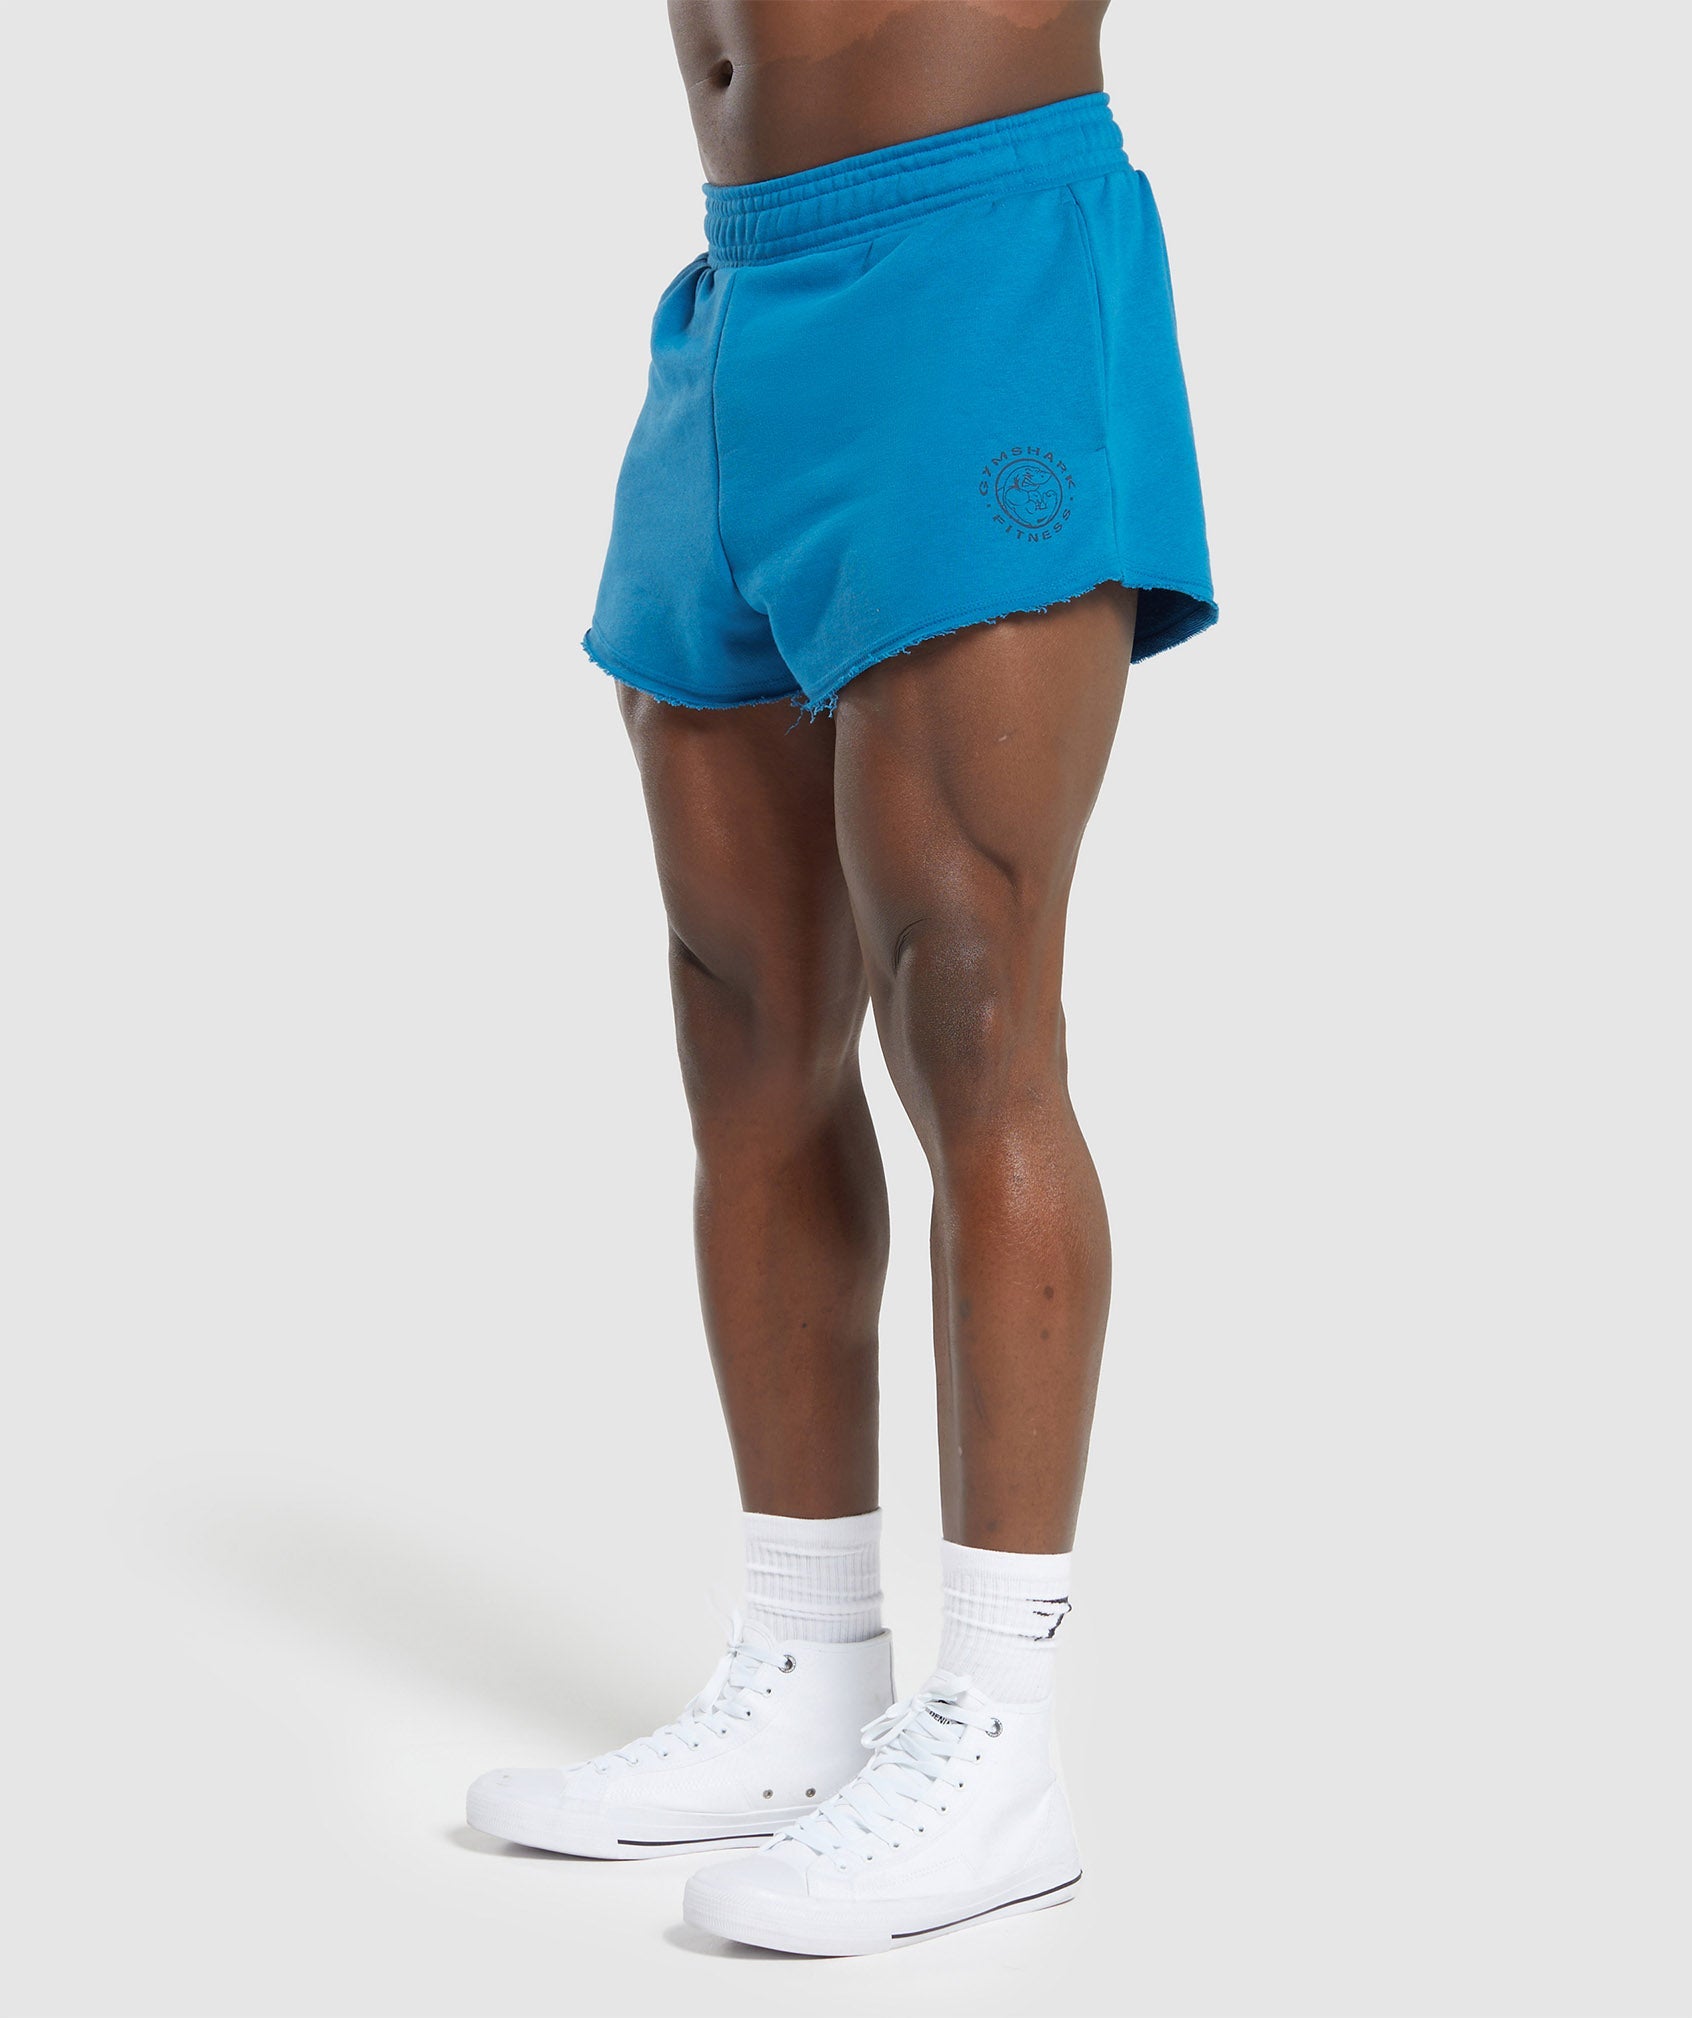 Legacy 4" Shorts in Retro Blue - view 3